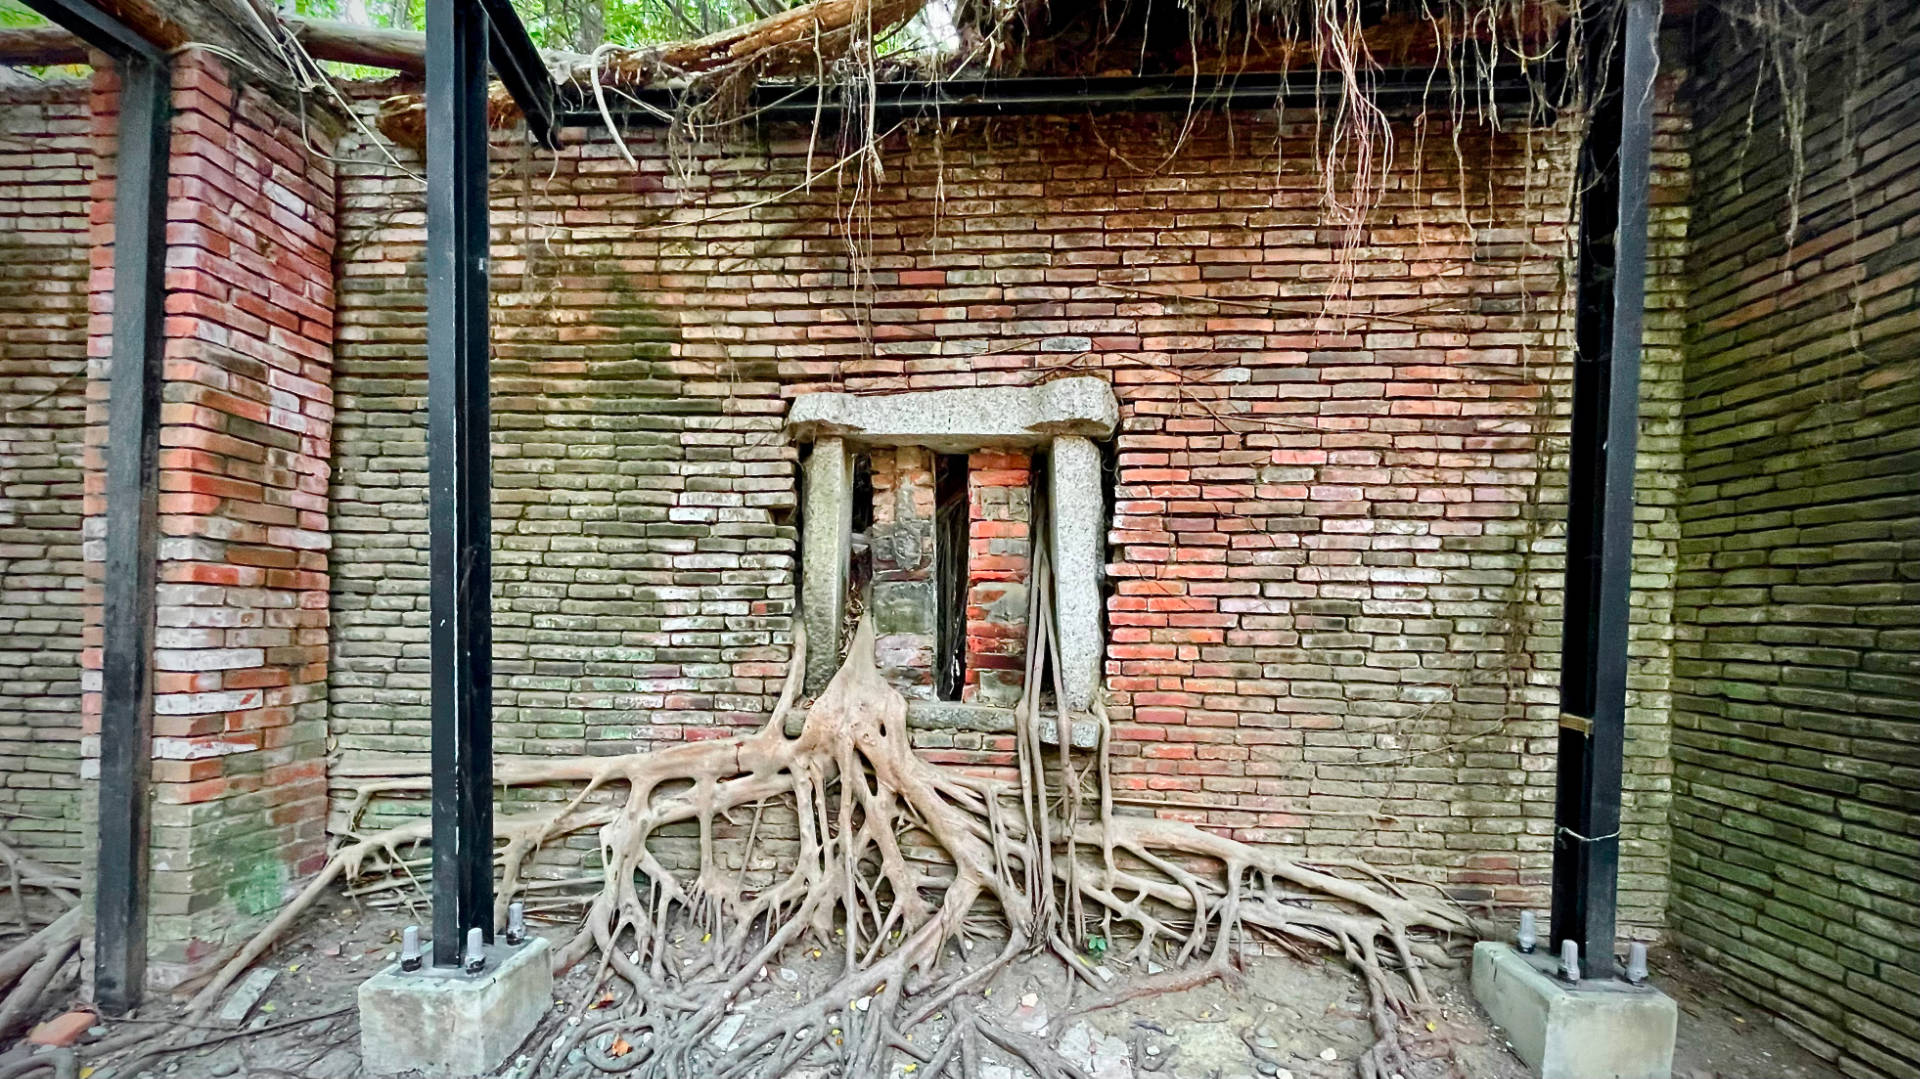 A roofless brick room with tree branches and roots growing through the window and along the walls and floor.